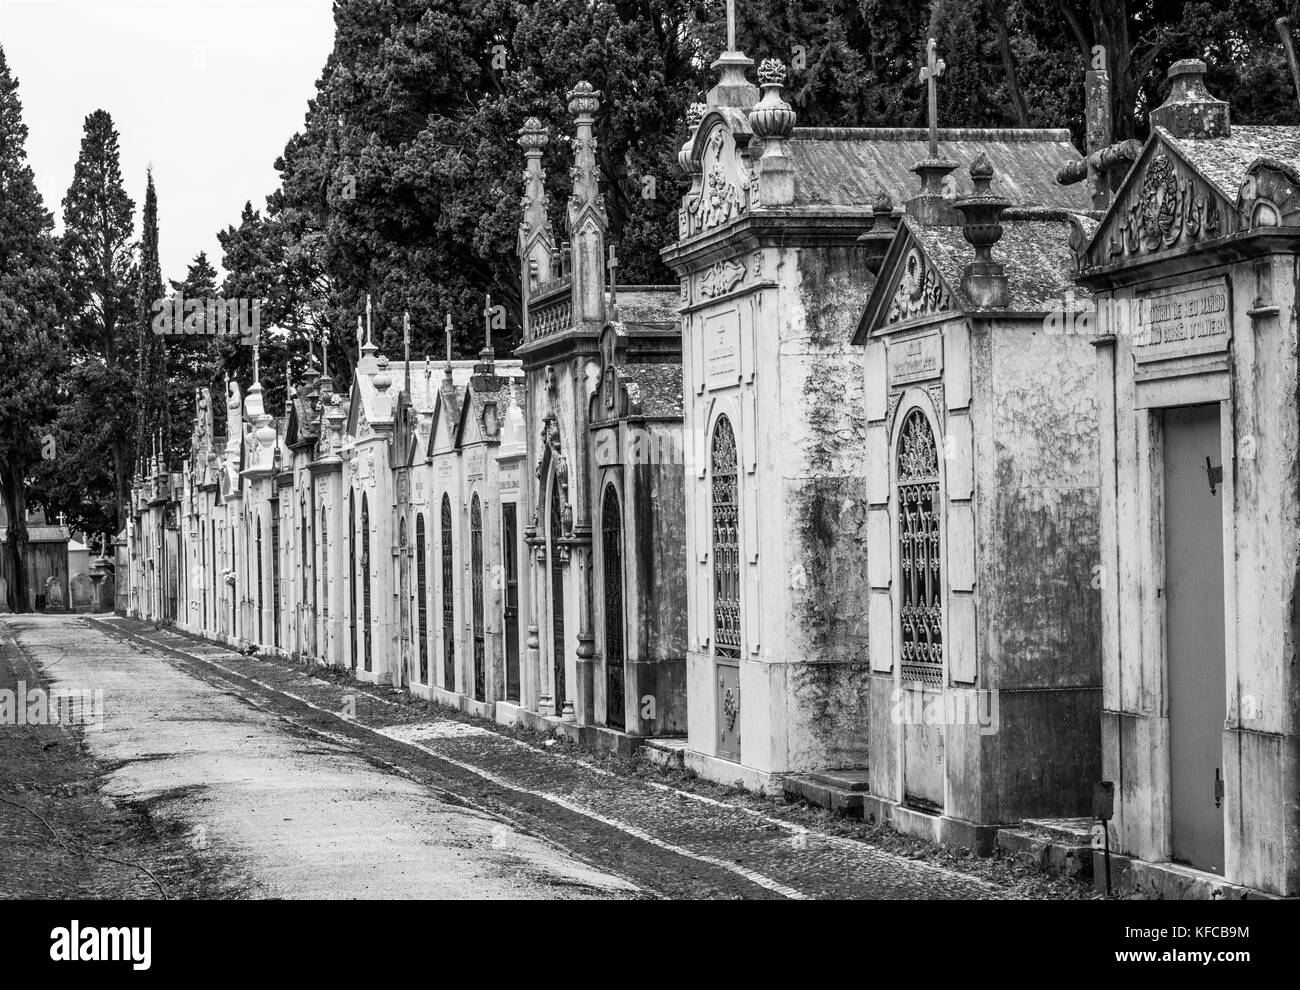 Tombs and tombstones in Prazeres Cemetery, Lisbon, Portugal. Prazeres is a former civil parish (freguesia) in the city and municipality of Lisbon. Stock Photo